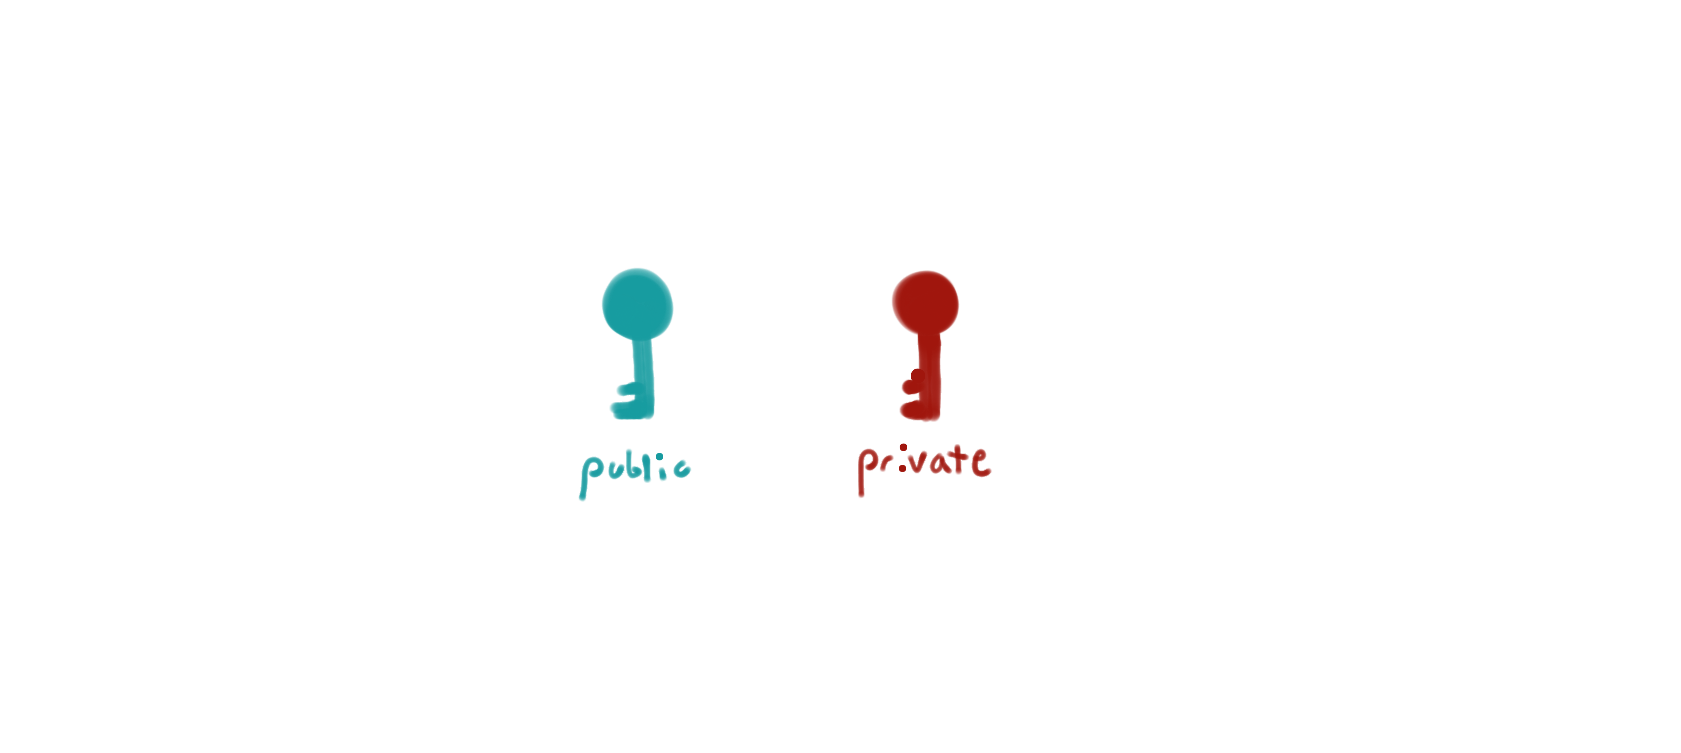 Illustration of public and private keys